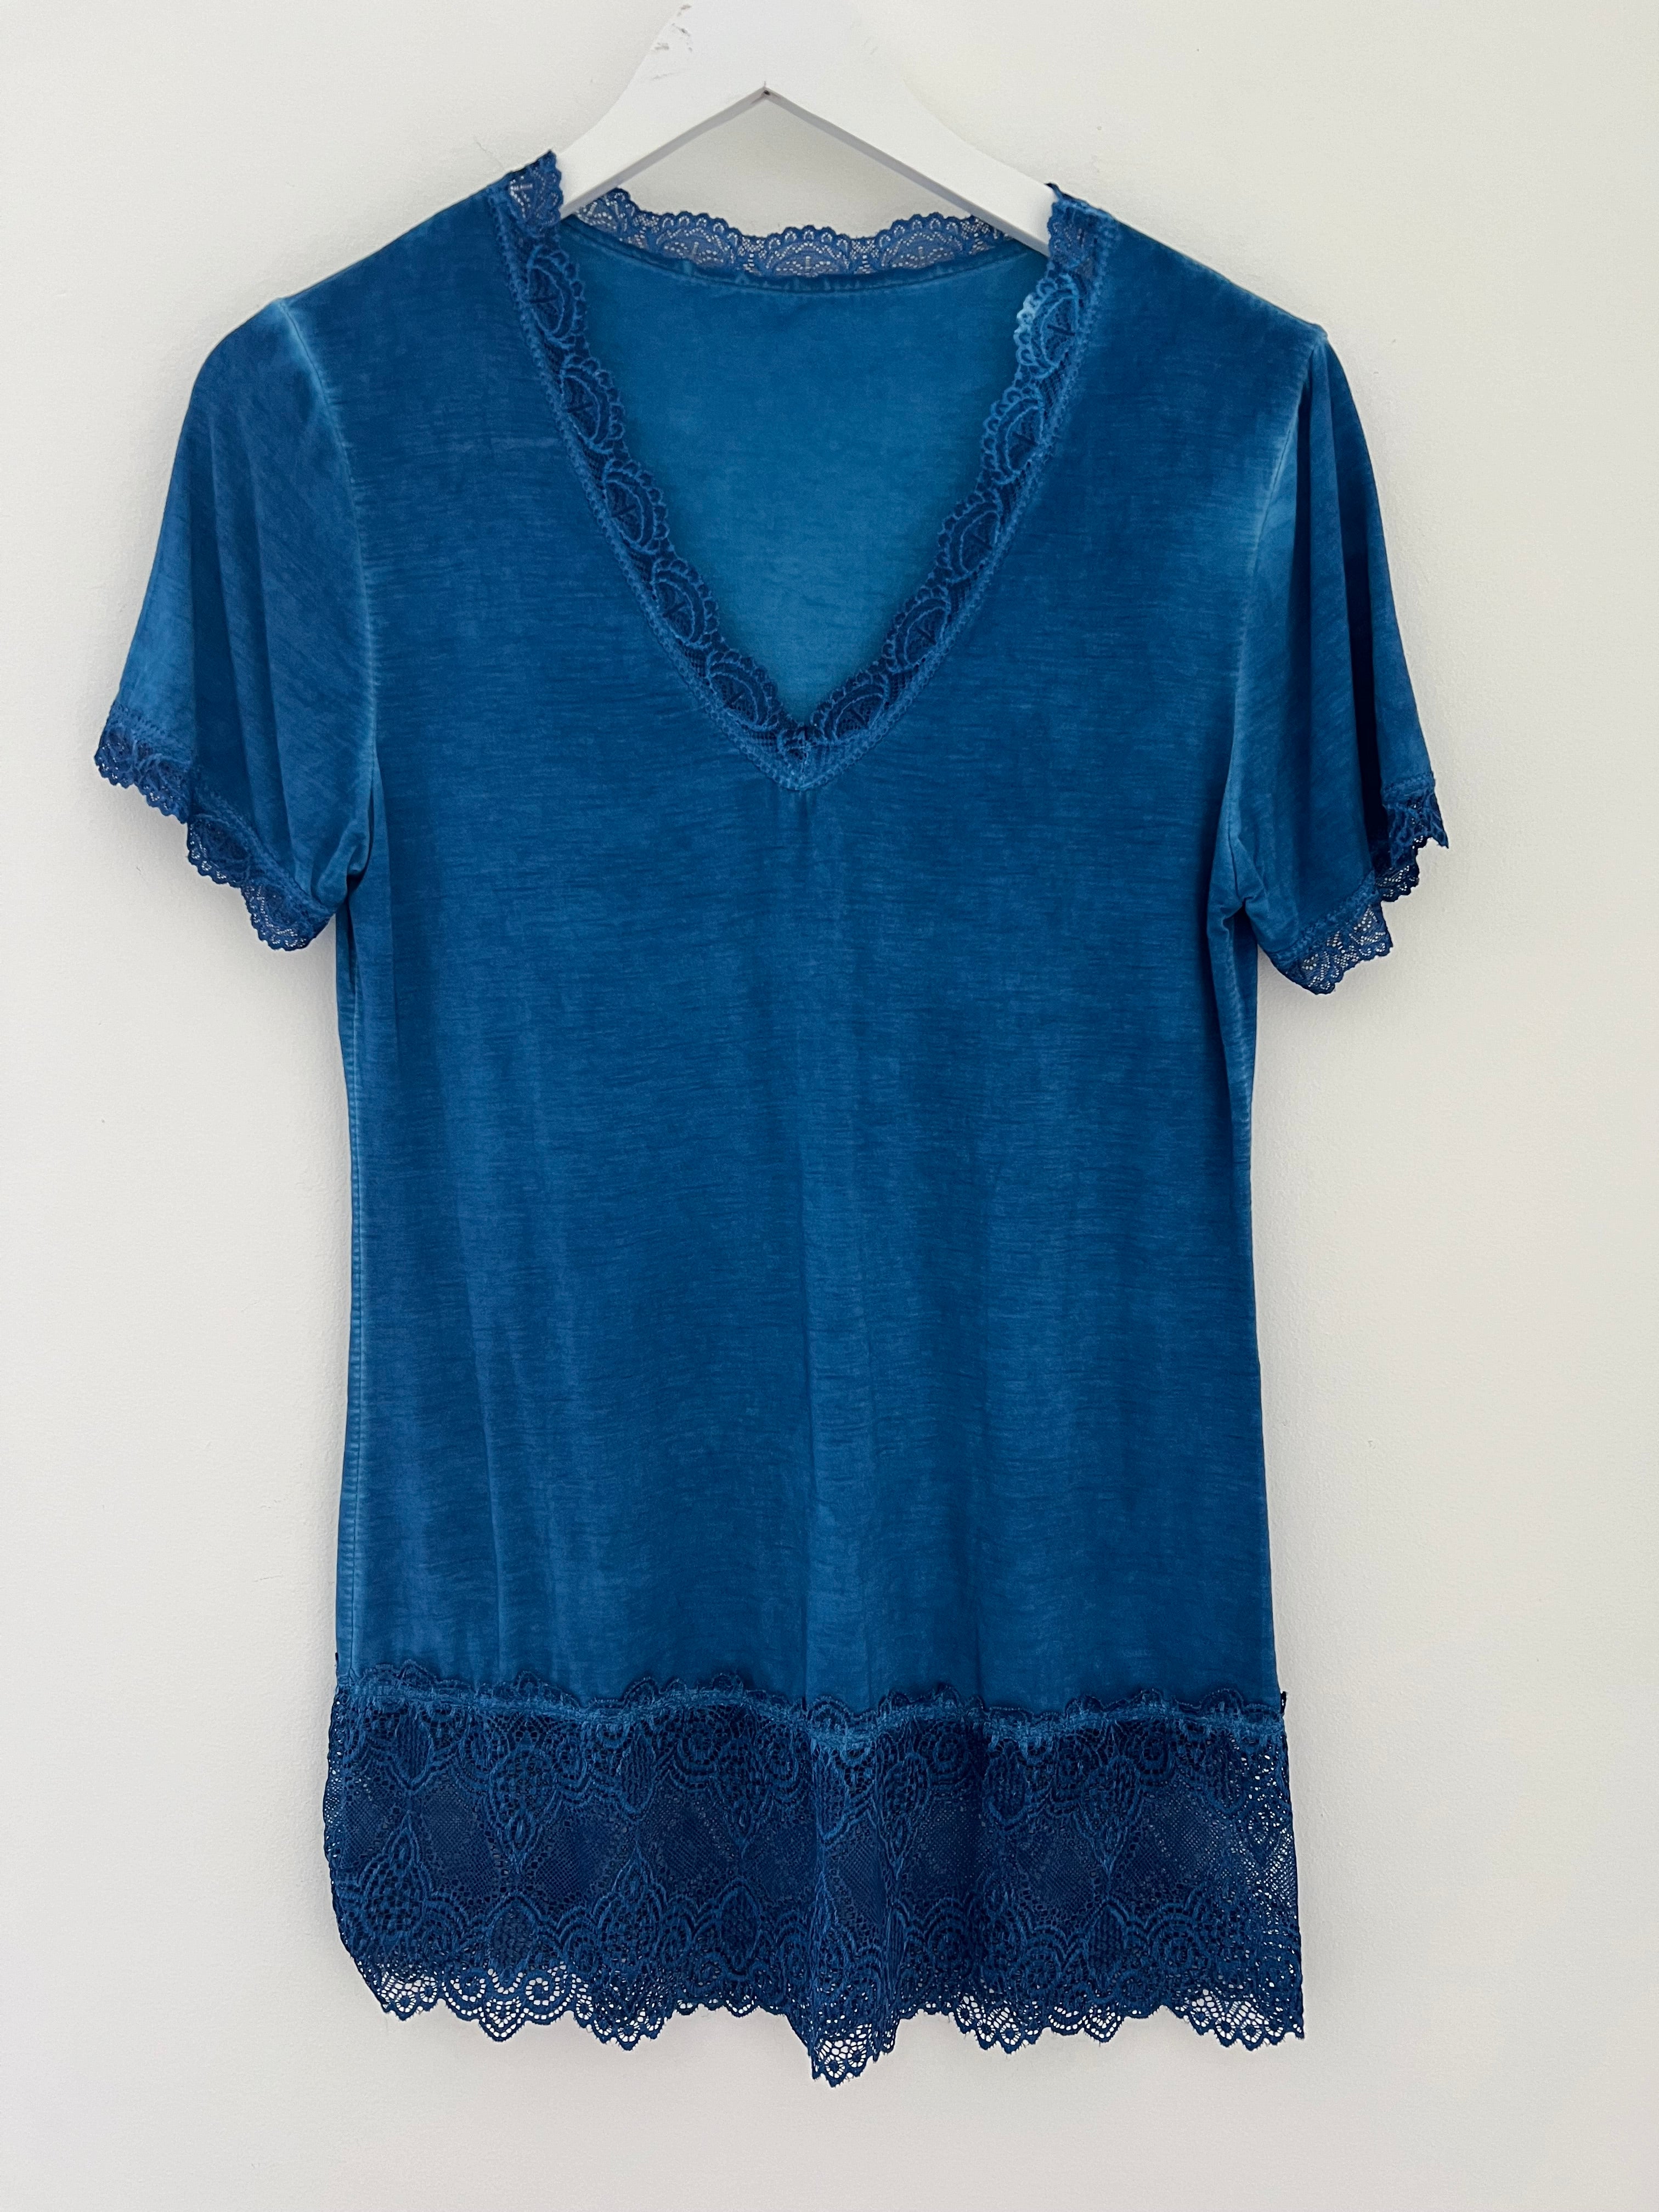 Short Sleeve Luxe Base Top in Blue